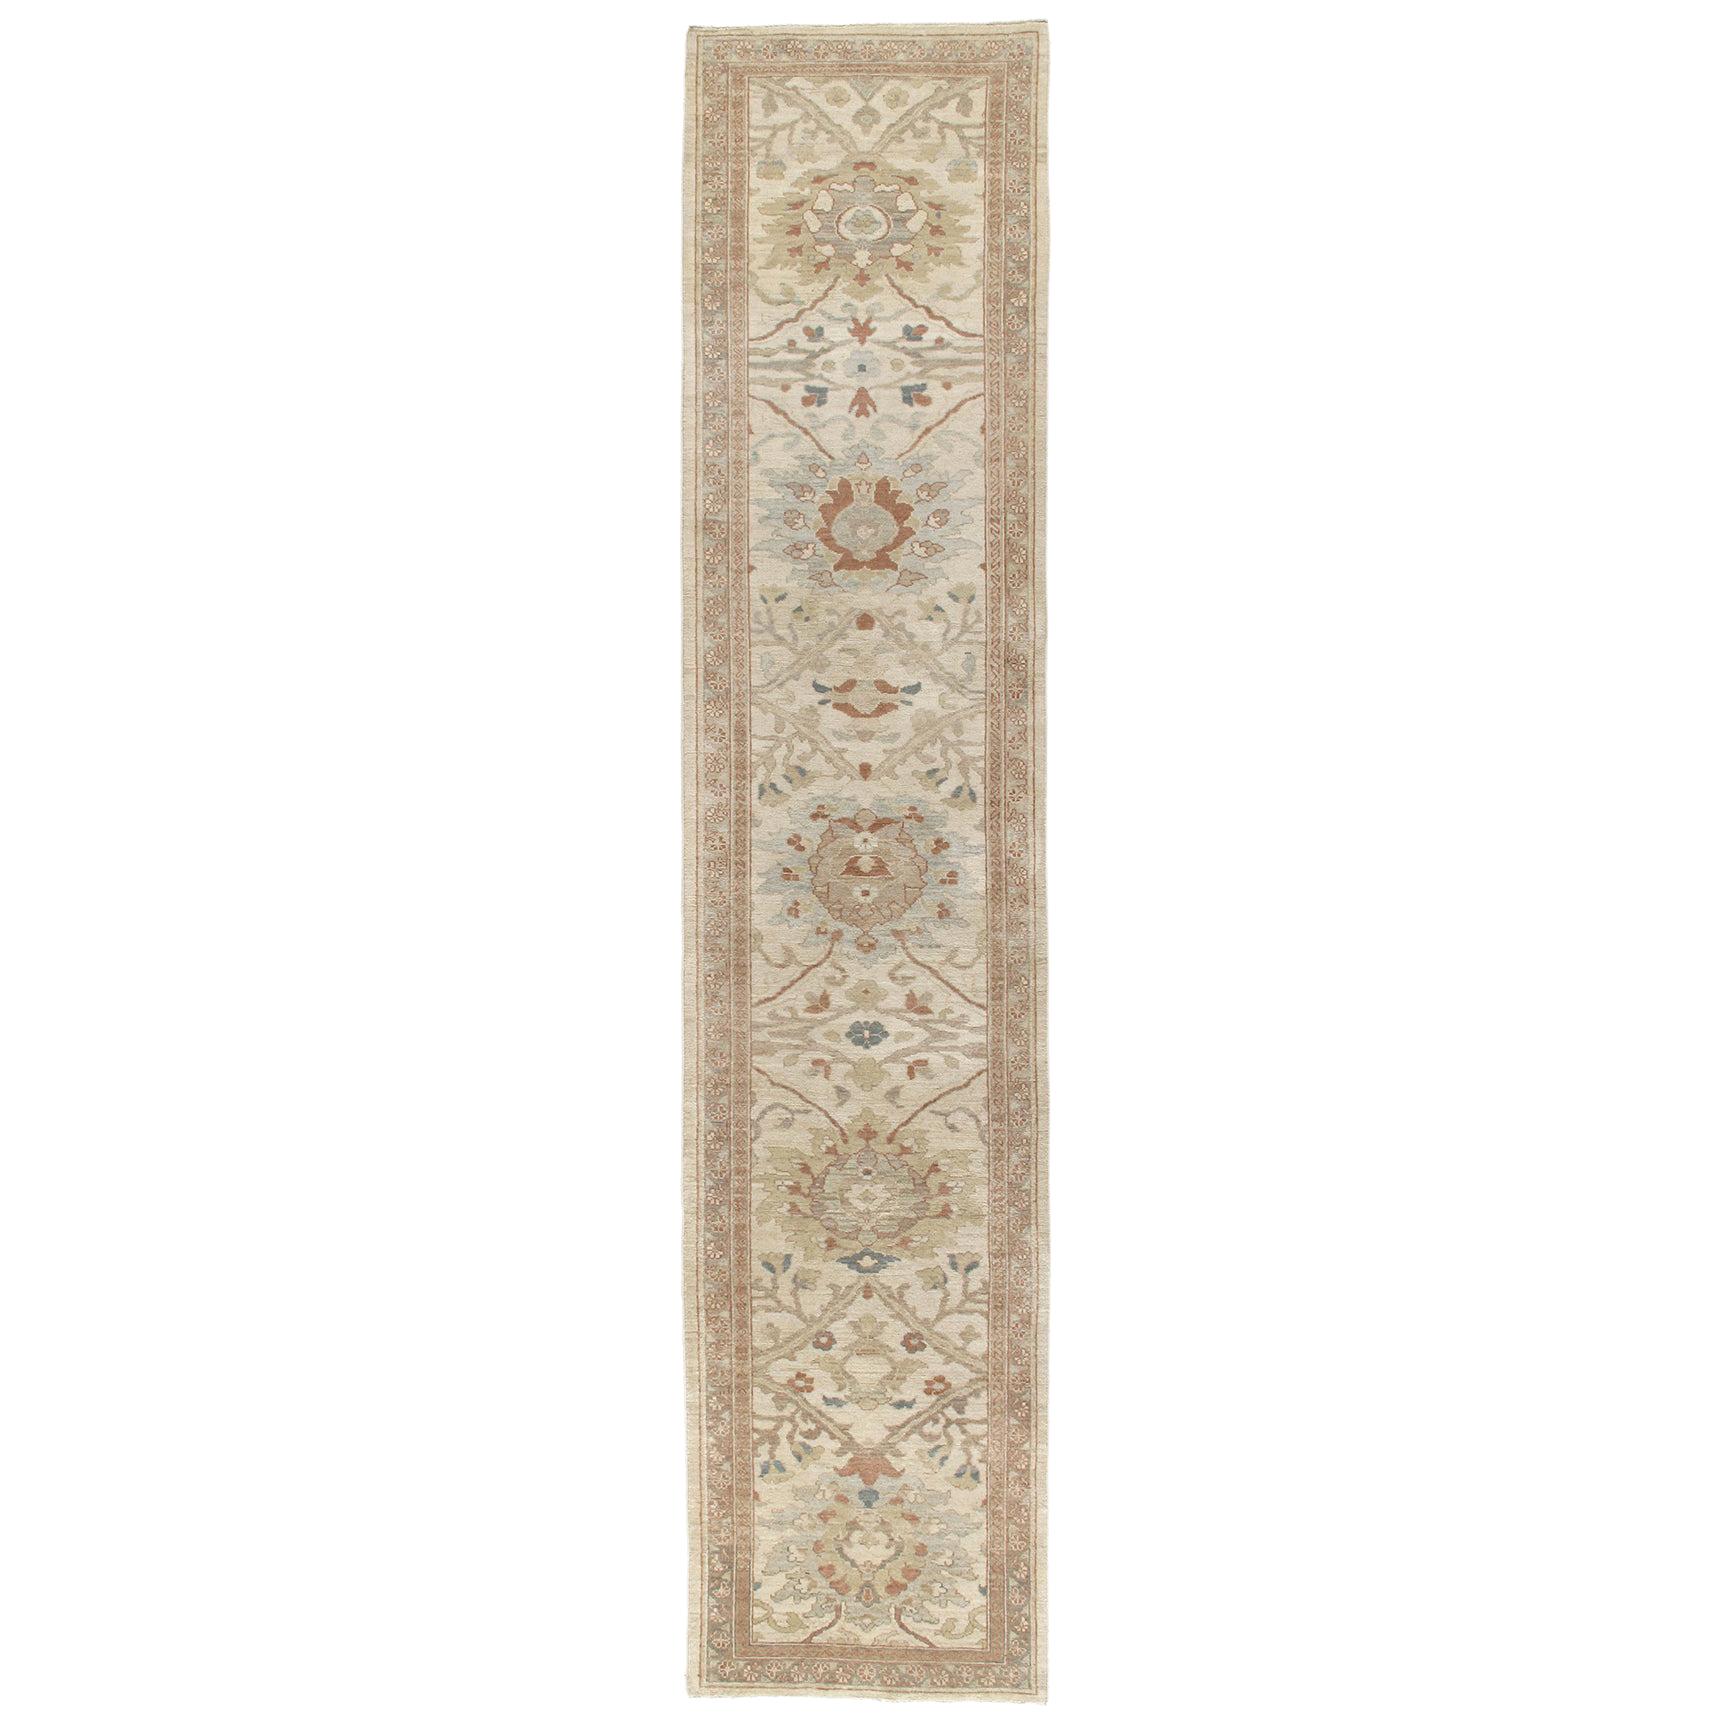 Persian Ziegler Sultanabad Handknotted Runner Rug in Camel and Beige Color